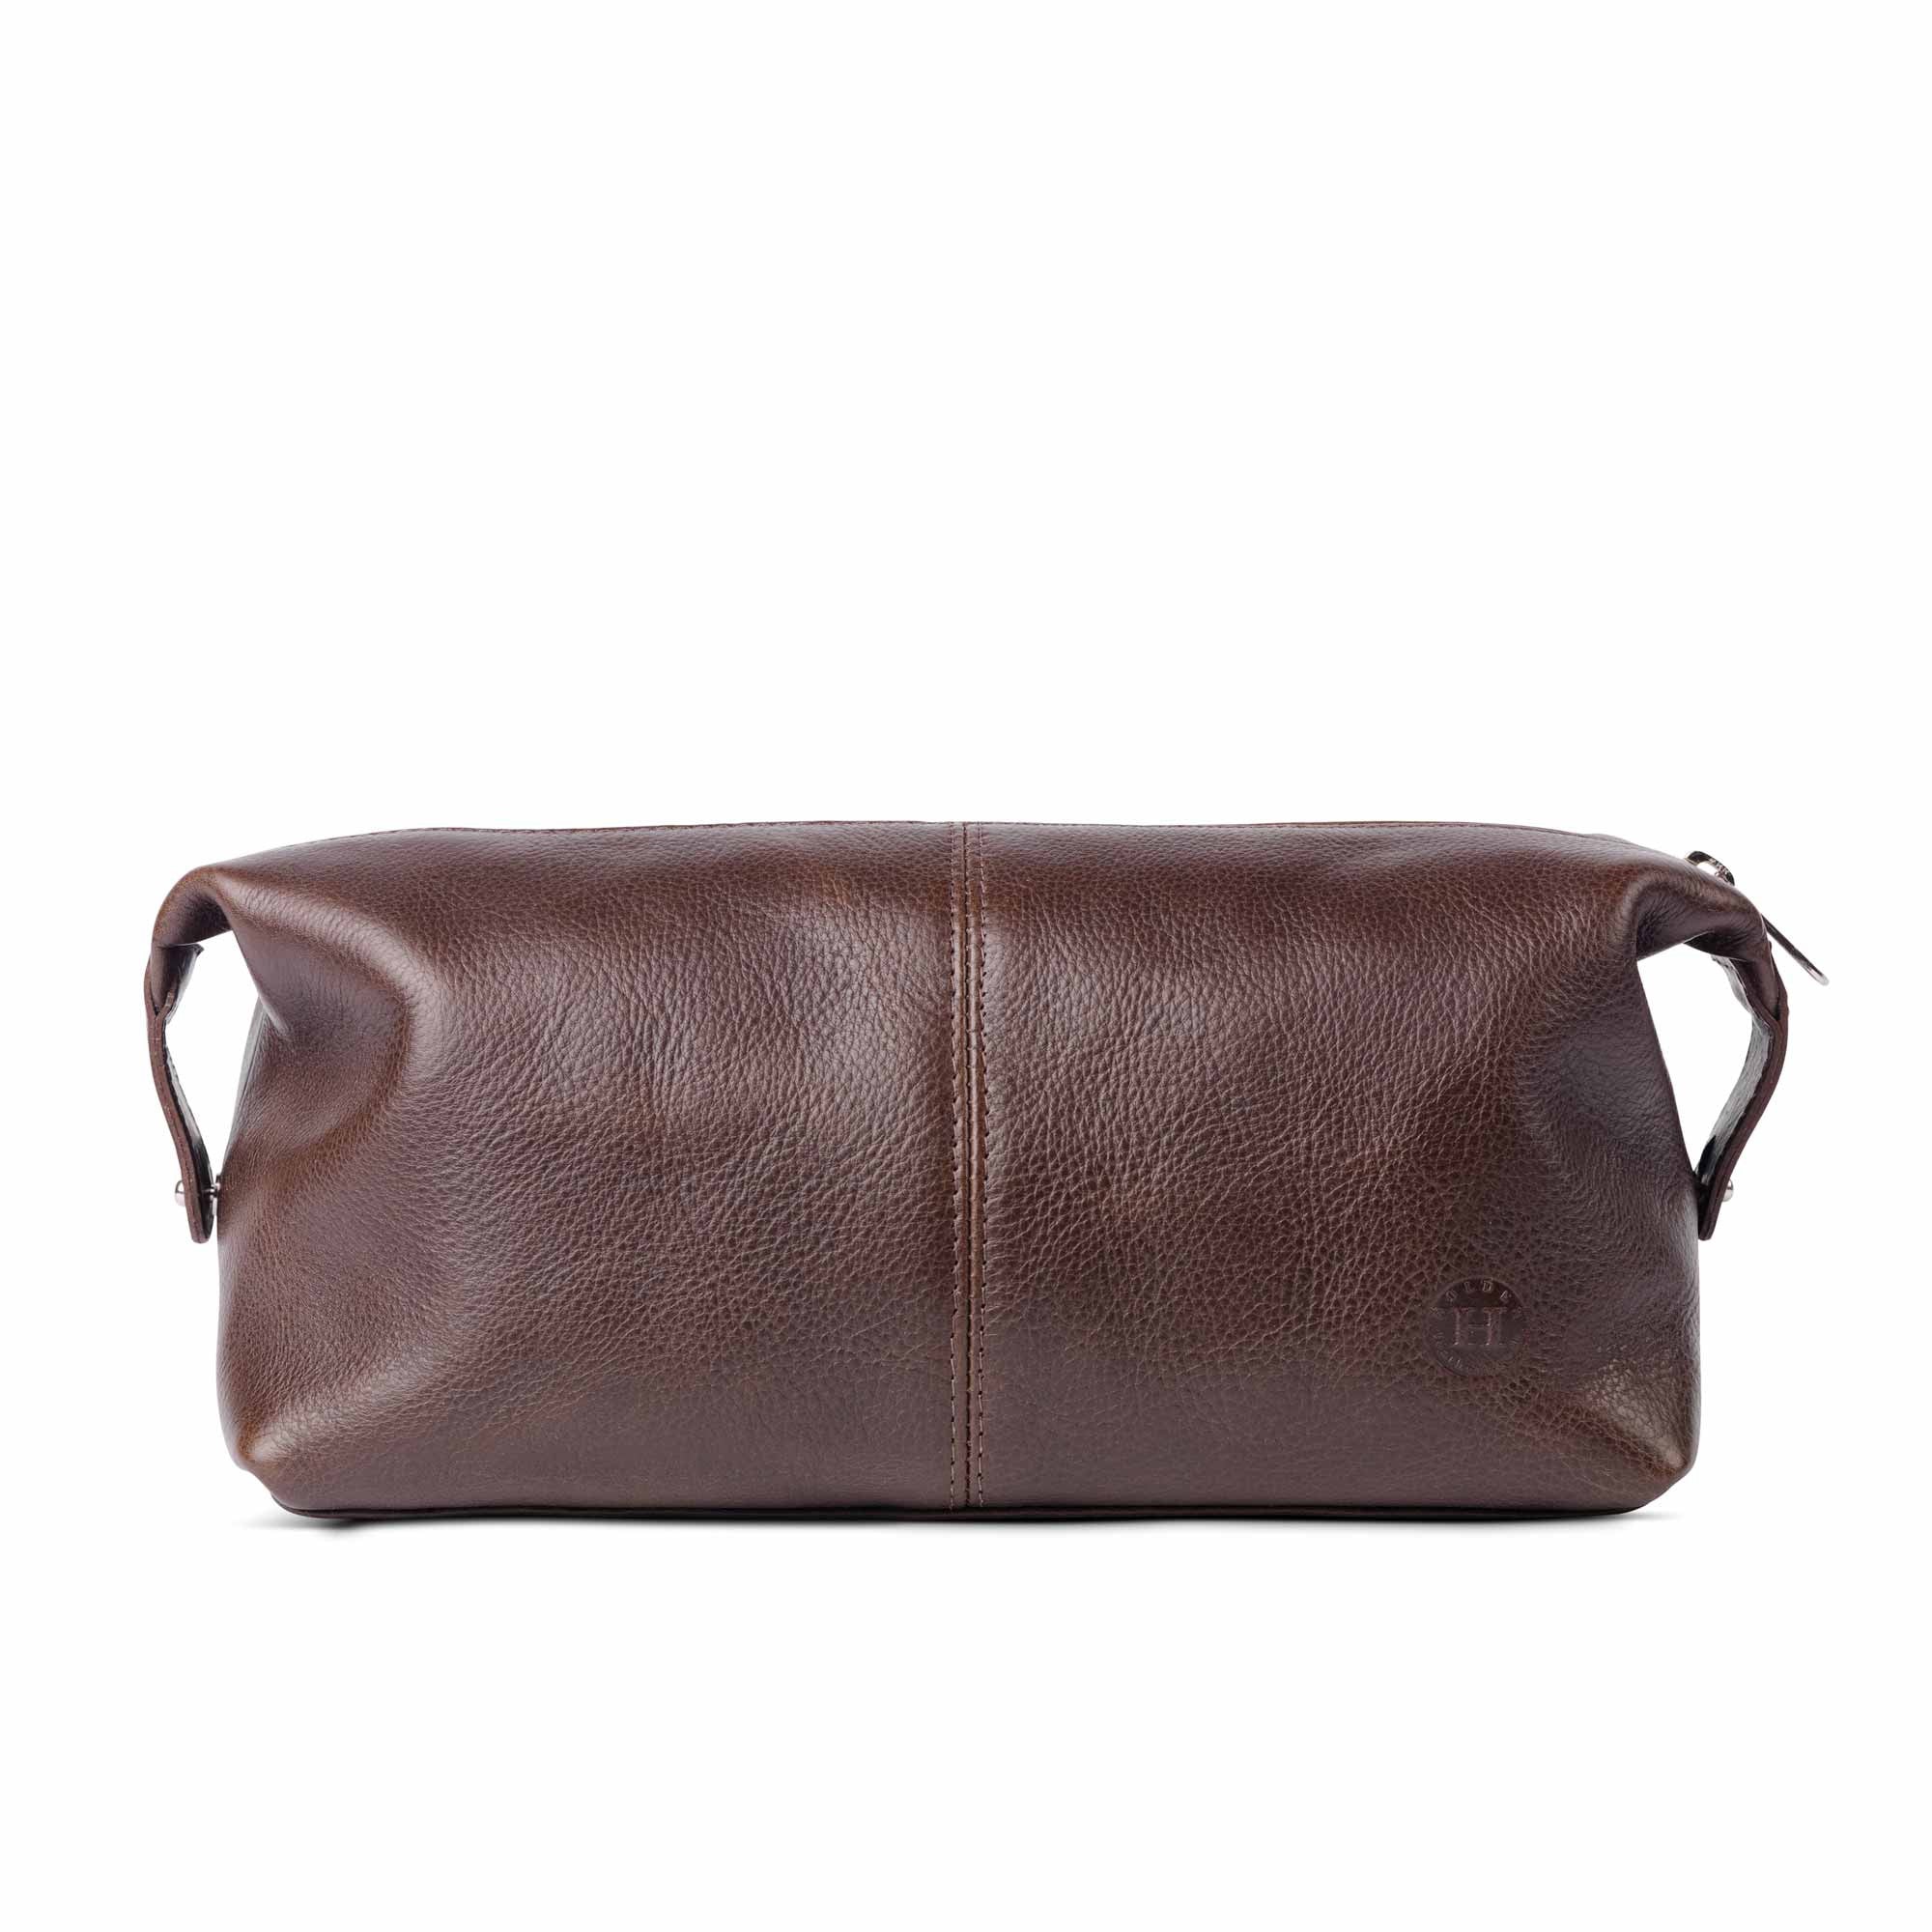 Holden Leather Washbag Brown - Holden Leathergoods, leather bags handmade in Ireland